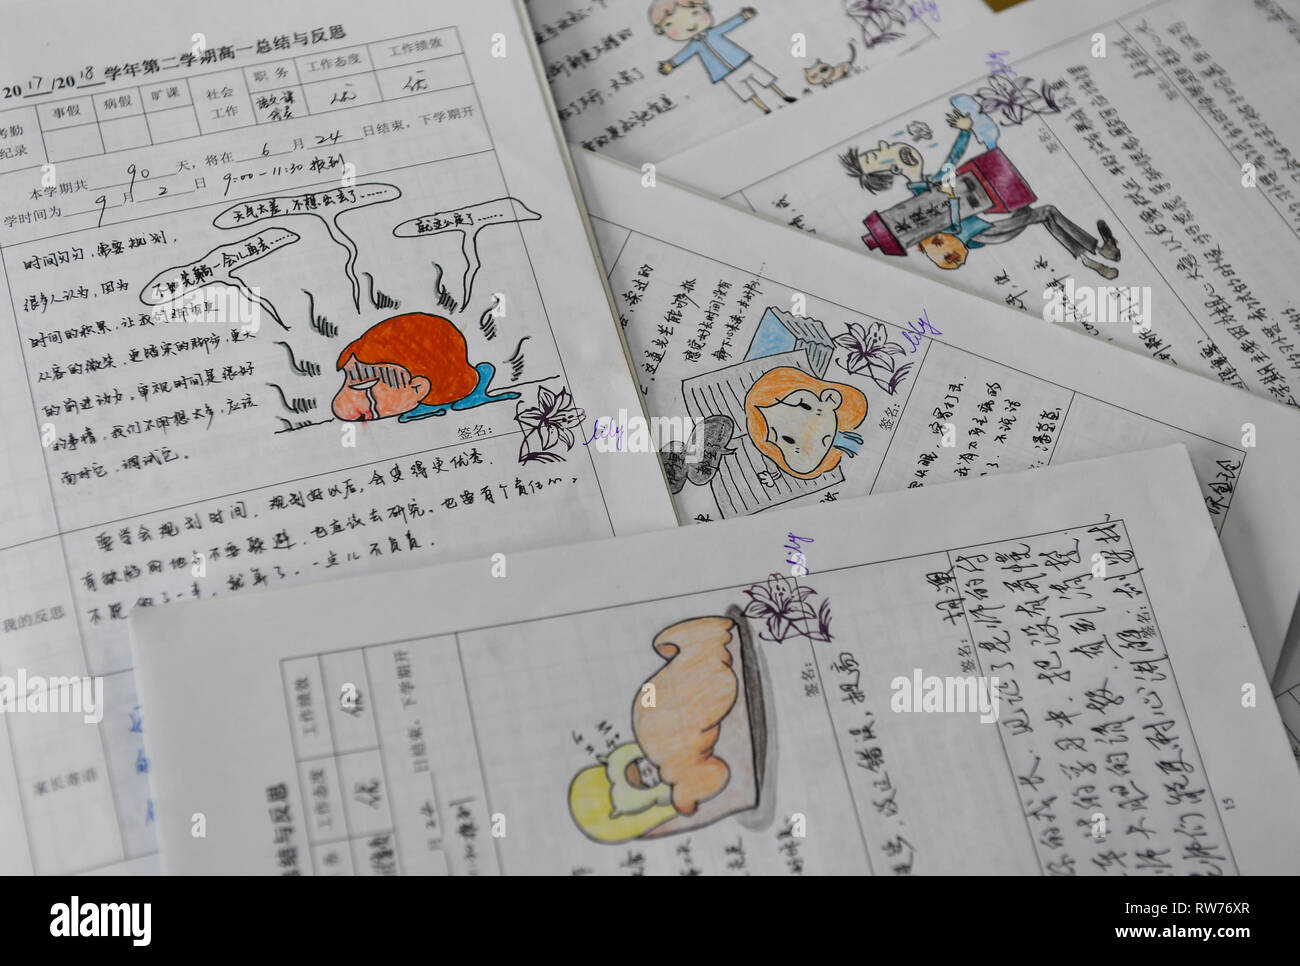 (190305) -- NANJING, March 5, 2019 (Xinhua) -- Comments with hand-drawn comics made by Yu Xiaolan are seen on student assignments at the Nanjing School for the Deaf in Nanjing, capital of east China's Jiangsu Province, March 4, 2019. Having spent 17 years with hearing-impaired students at the Nanjing School for the Deaf, Yu Xiaolan has never regretted her choice as a teacher here.     'I still remember the day when I came to the campuse for the job interview,' said Yu, 'I could see students running on the playground, just like the normal kids of other schools, but I couldn't hear even a small  Stock Photo